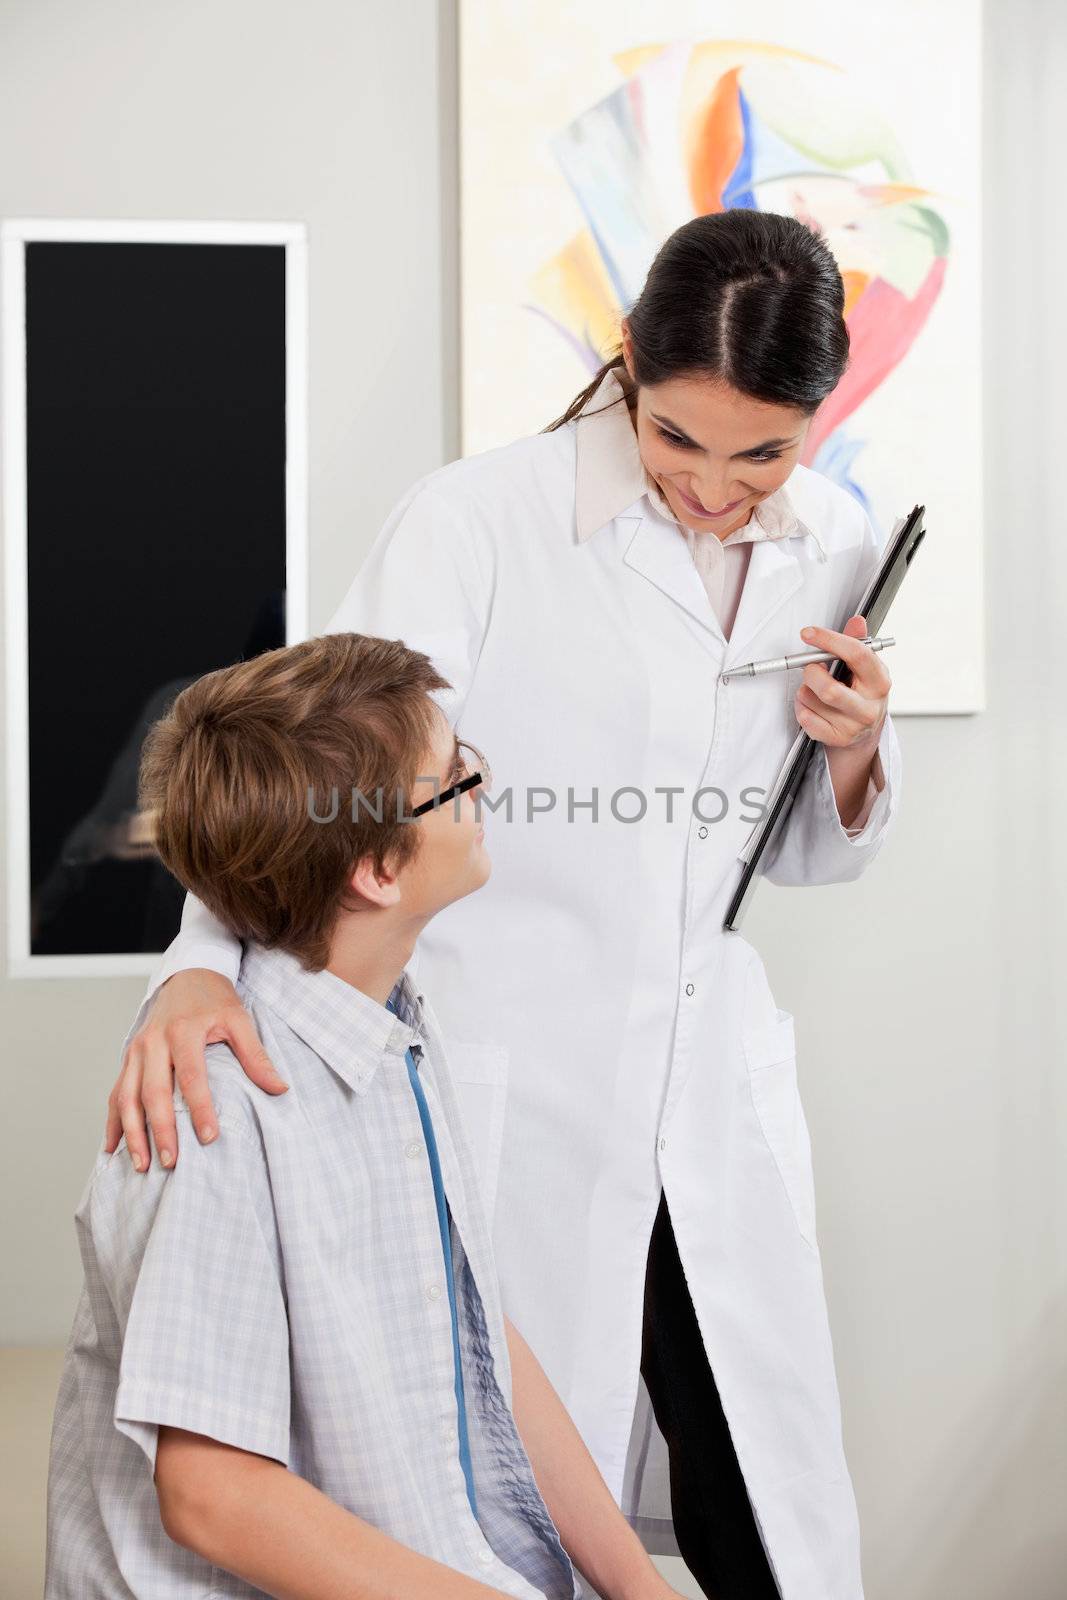 Teenage boy with glasses consulting to an eye specialist at the clinic